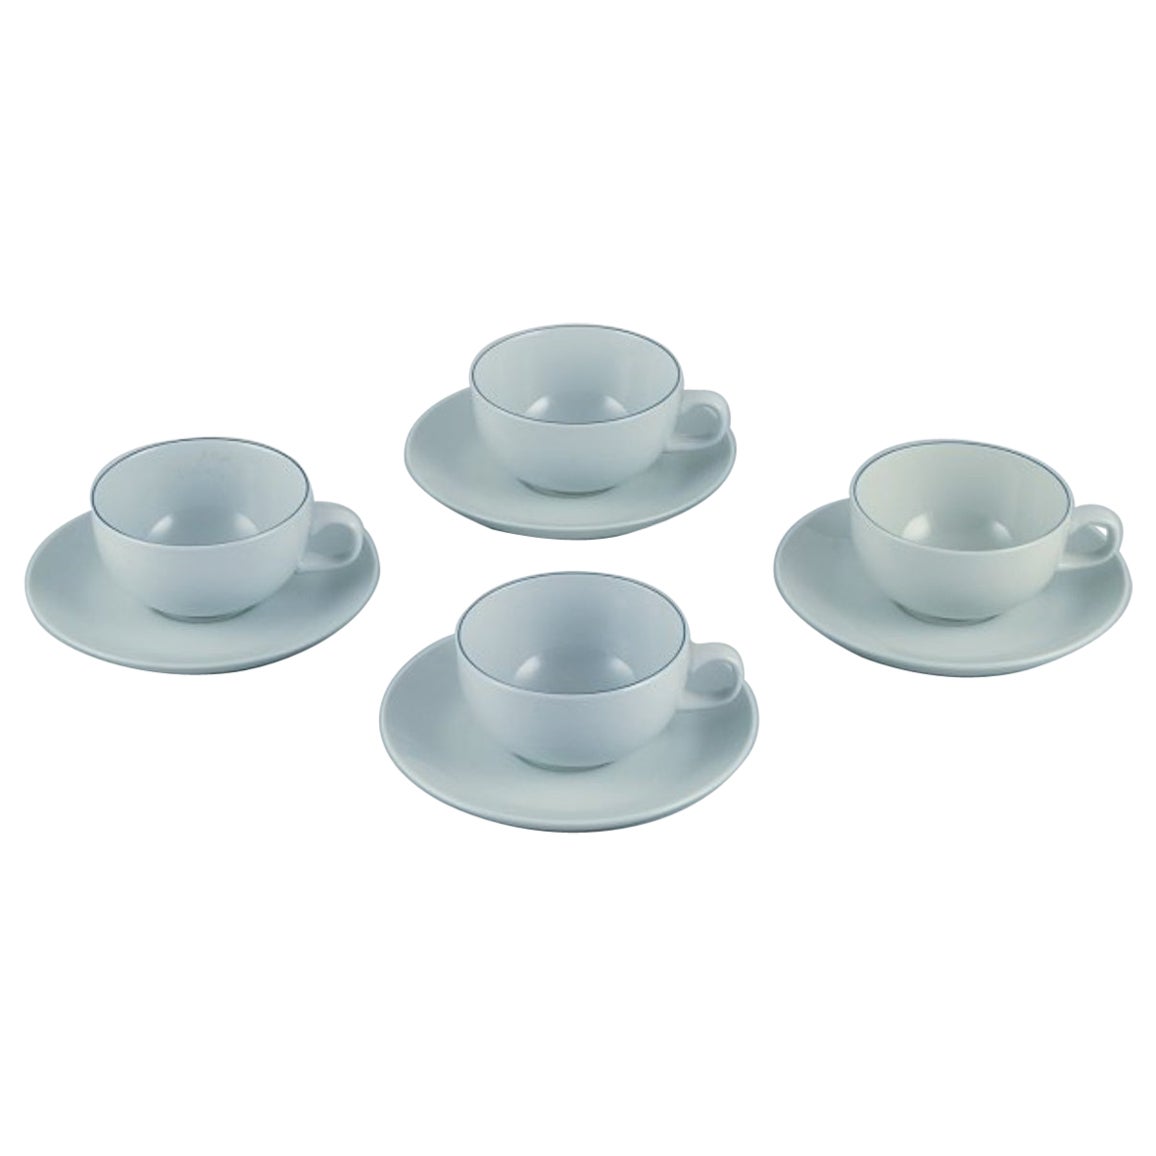 Grethe Meyer for Aluminia. Set of four Blue line coffee cups with saucers. For Sale